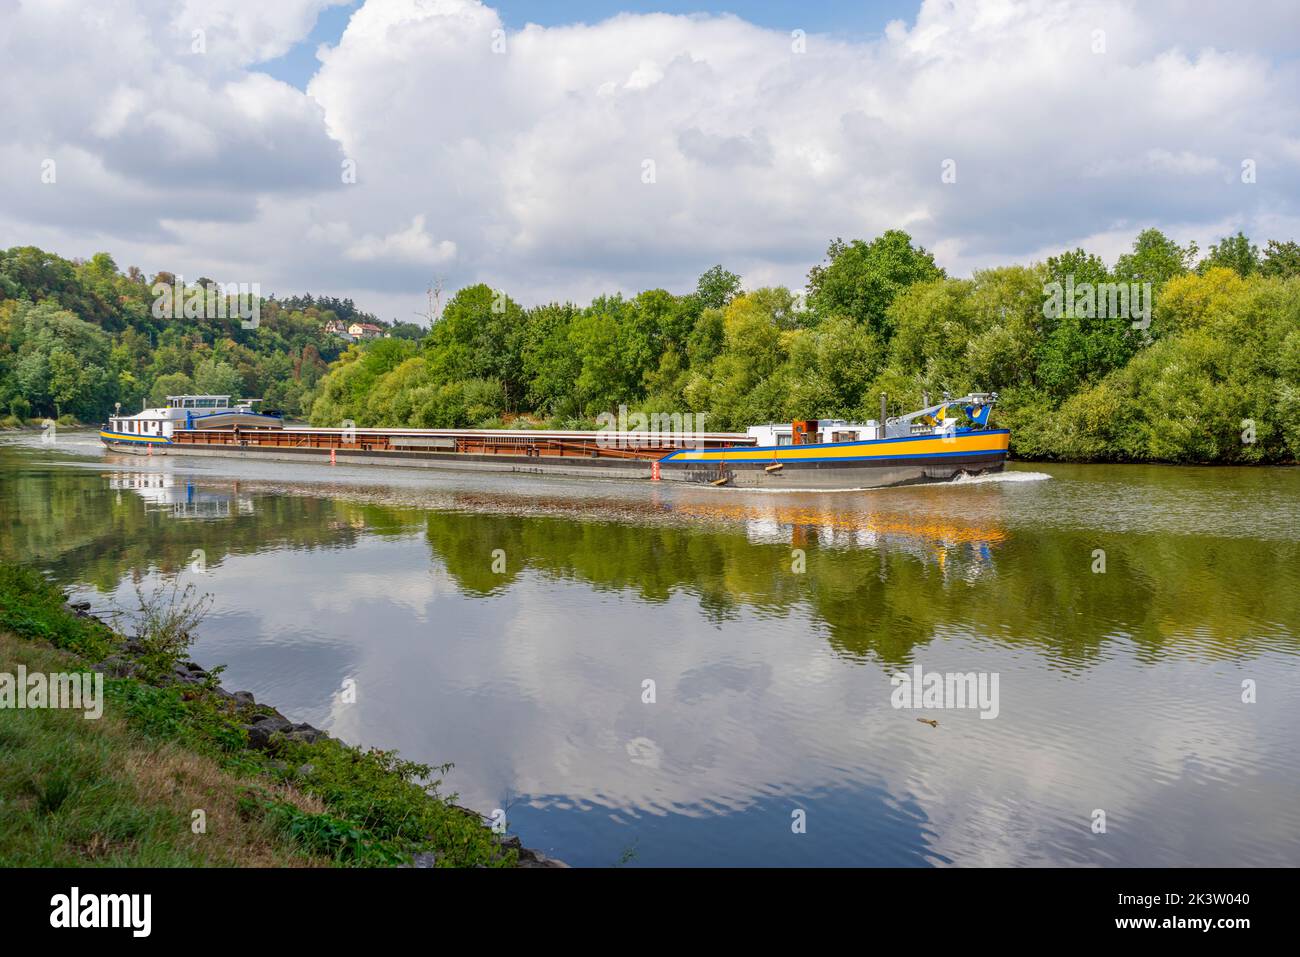 Cargo ship on a river at summer time in sunny ambiance Stock Photo